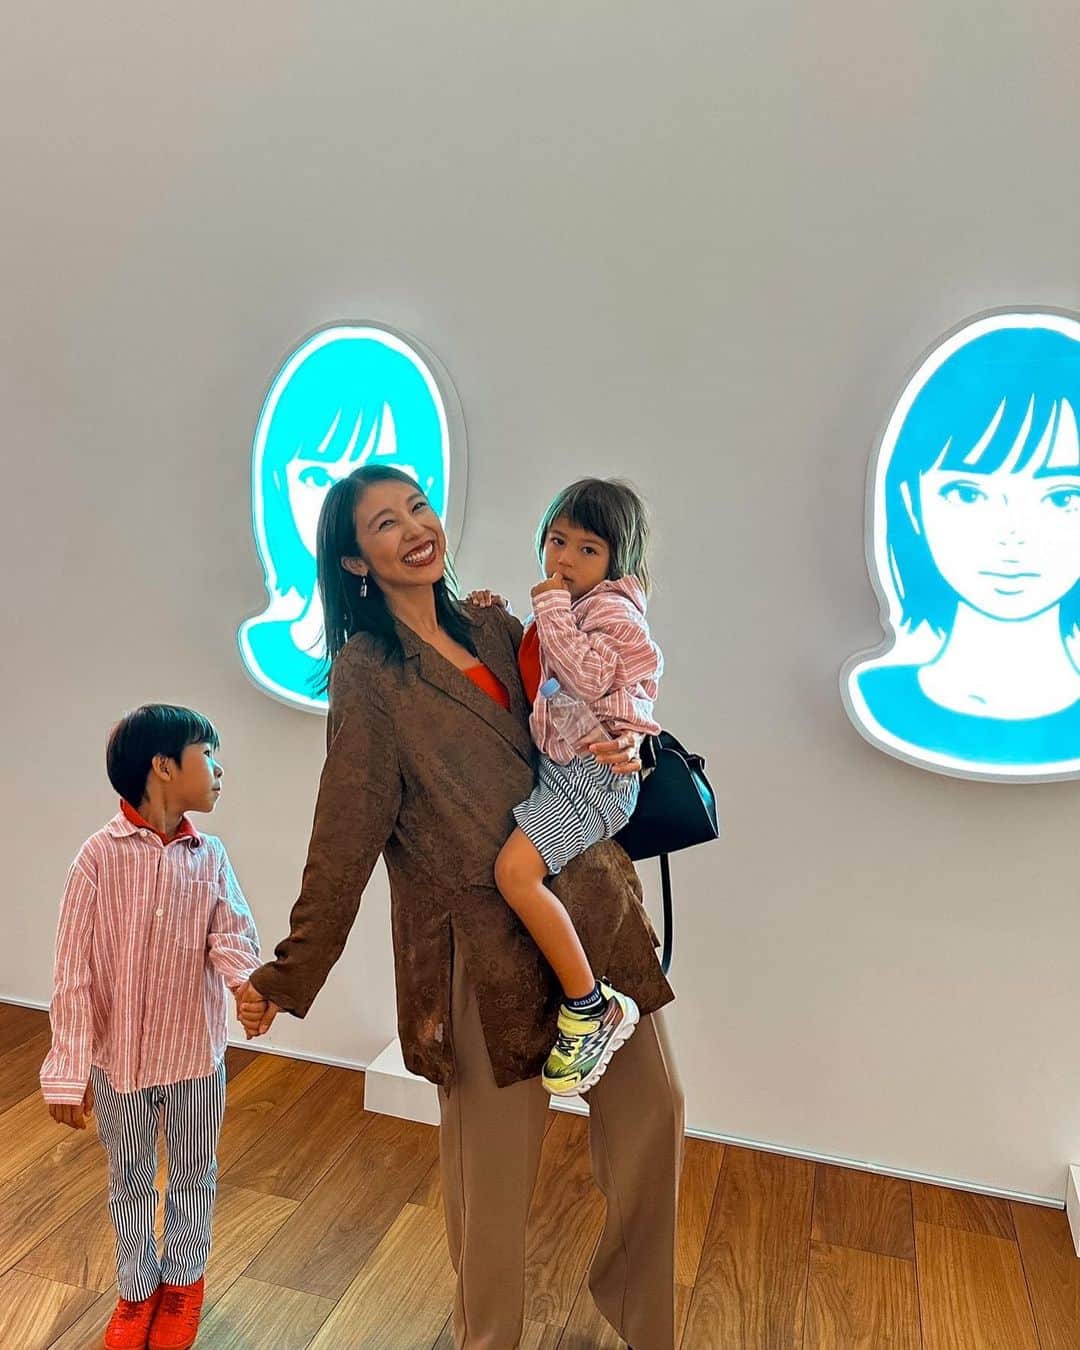 磯部映見のインスタグラム：「I've been able to visit a lot of exhibitions lately and finally, my two kids are (almost) old enough to appreciate the exhibition from modern to contemporary art.  I can't thank all you amazing artists enough for giving us the chance to engage with the artwork and have conversations with my children from both a child's and adult's perspective.  And a special thanks to my dear old friend @alisaueno for inviting me to the reception at @tandyprojects ❤️🩶  最近は(ギリギリ)子供達を連れて近代から現代まで鑑賞できるような子育てフェーズに。親子で一緒にみたものを更新。  ・KYNE展Reception  長男はグレーの作品がお気に入りで、次男はあの女の子は可愛くて優しいと思ったらしい。母は特大のシェイプドが、良かっなーなんてことを帰りの中華で3人で議論したので載せておく。お誘いありがとう！  台湾で鑑賞した　@t.maho_art さんの作品。どんな国でも貫いている。最高でした。  次男念願の恐竜博物館。  そして夏の自由研究は海辺の美術館で。住んでる環境に美術館がある贅沢。  他にもたくさん載せたいけれどまずは息子たちとの鑑賞記録を。 ❤️  #親子鑑賞日記」